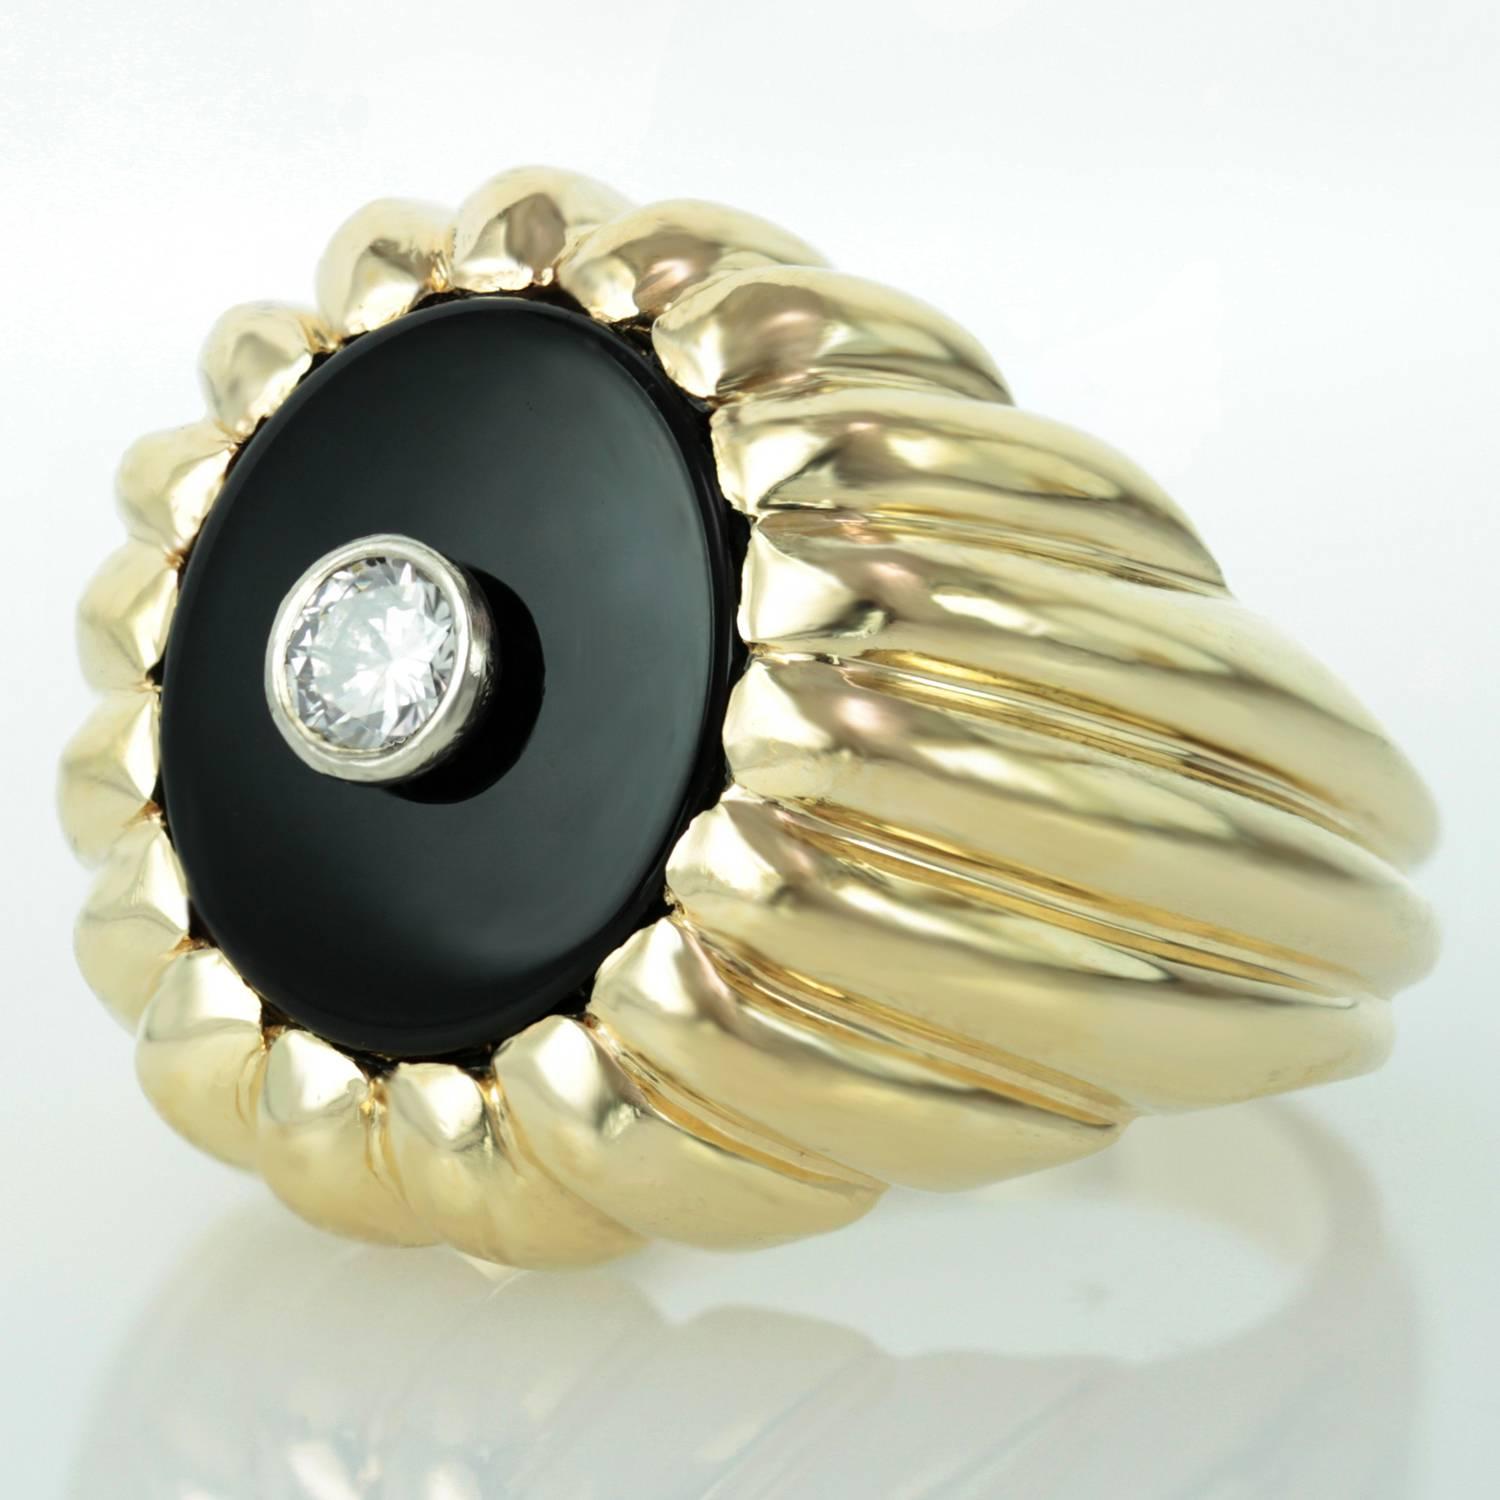 This stunning vintage men's ring is made in 14k yellow gold and features a circular black Onyx crown bezel-set with a sparkling solitaire diamond, estimated 0.20 carat. 
Circa 1980s. Measurements: 0.74